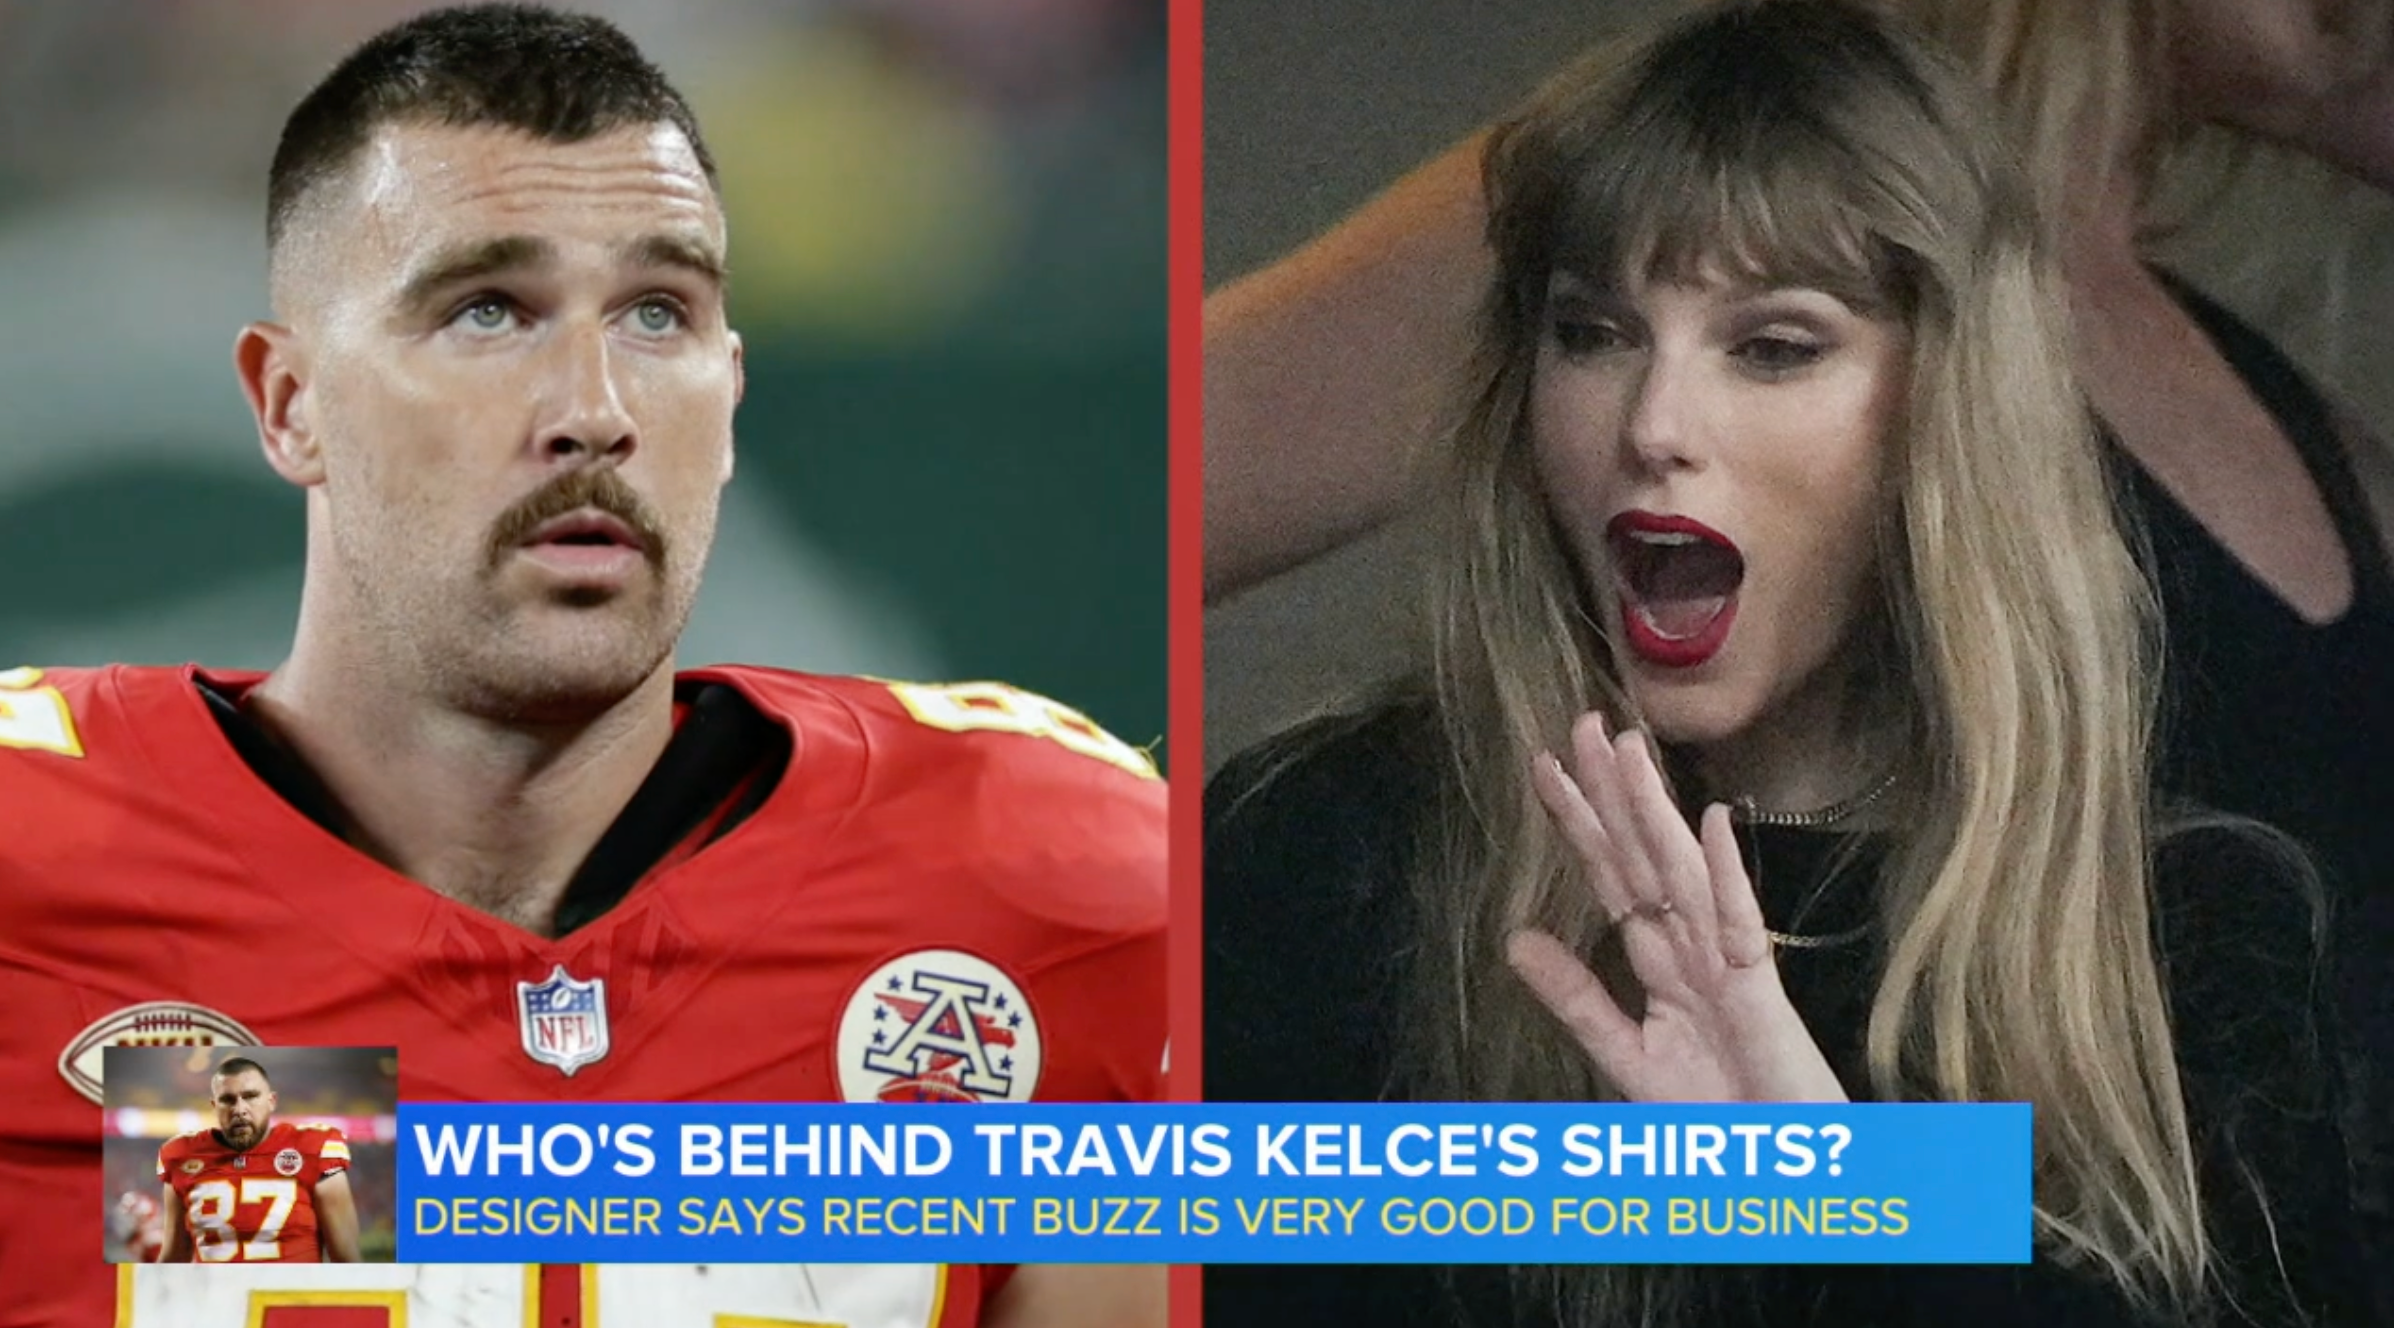 ABC News - Who’s behind Travis Kelce shirts?